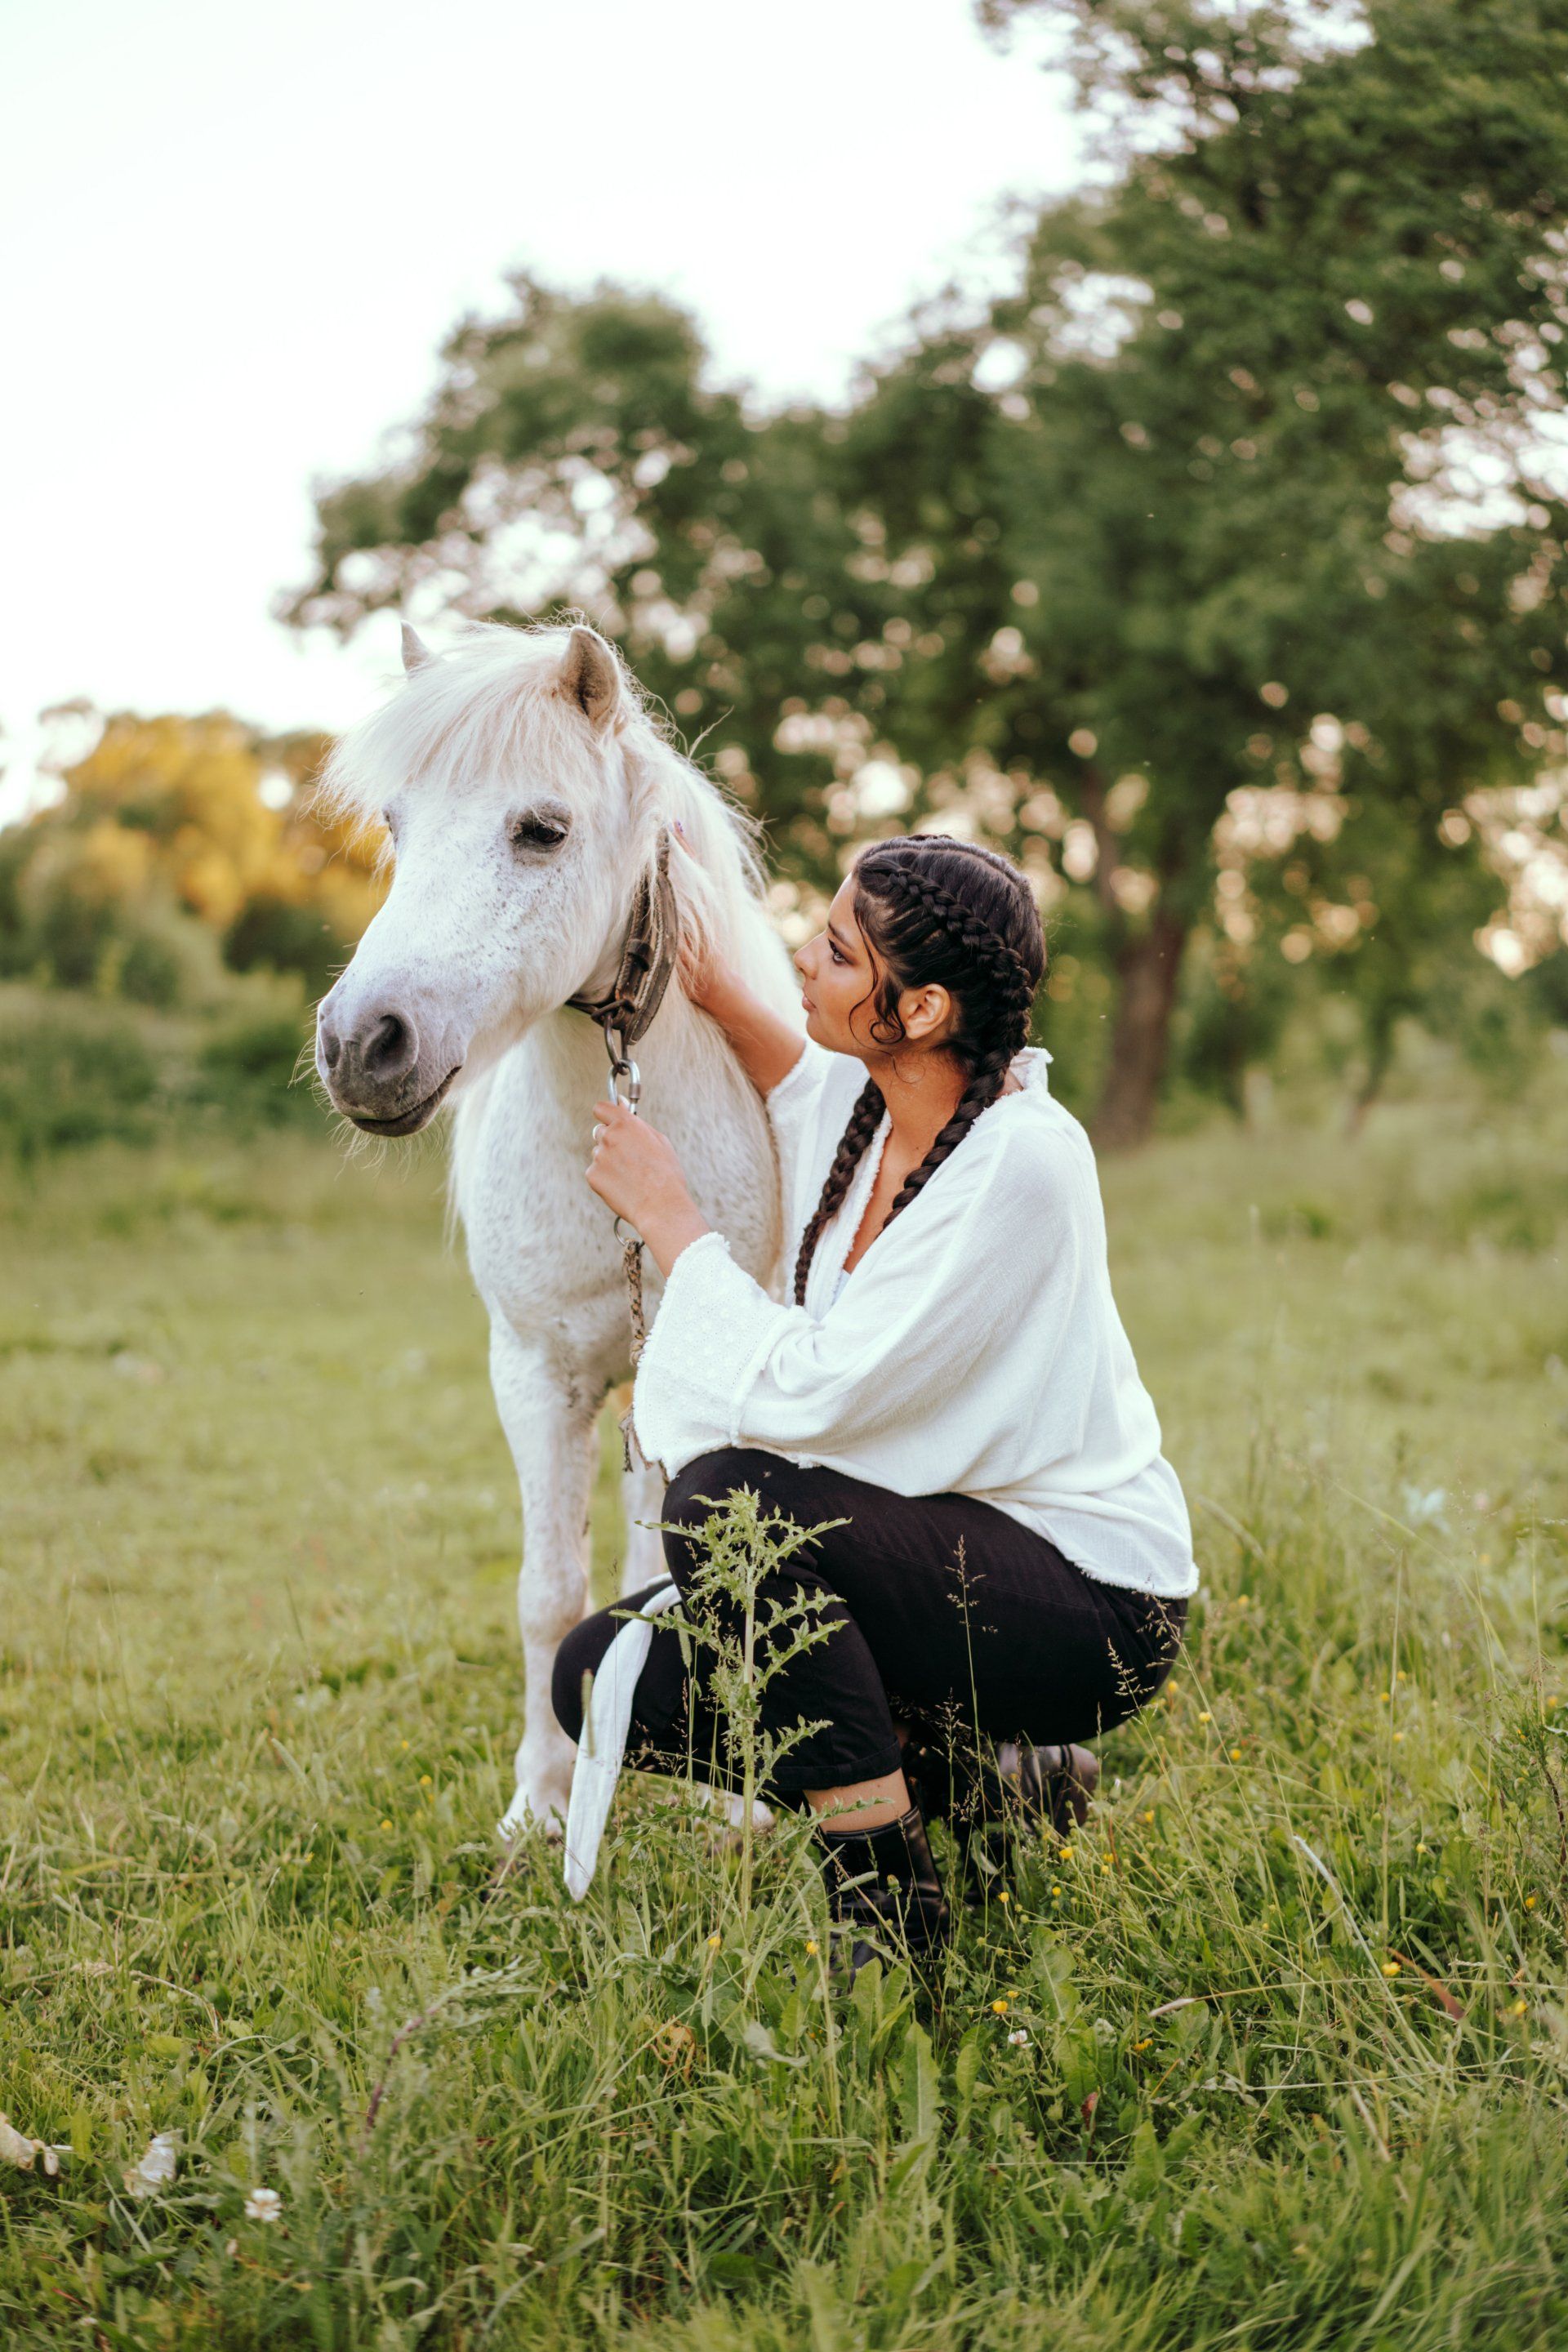 a woman is kneeling down next to a white horse in a field .